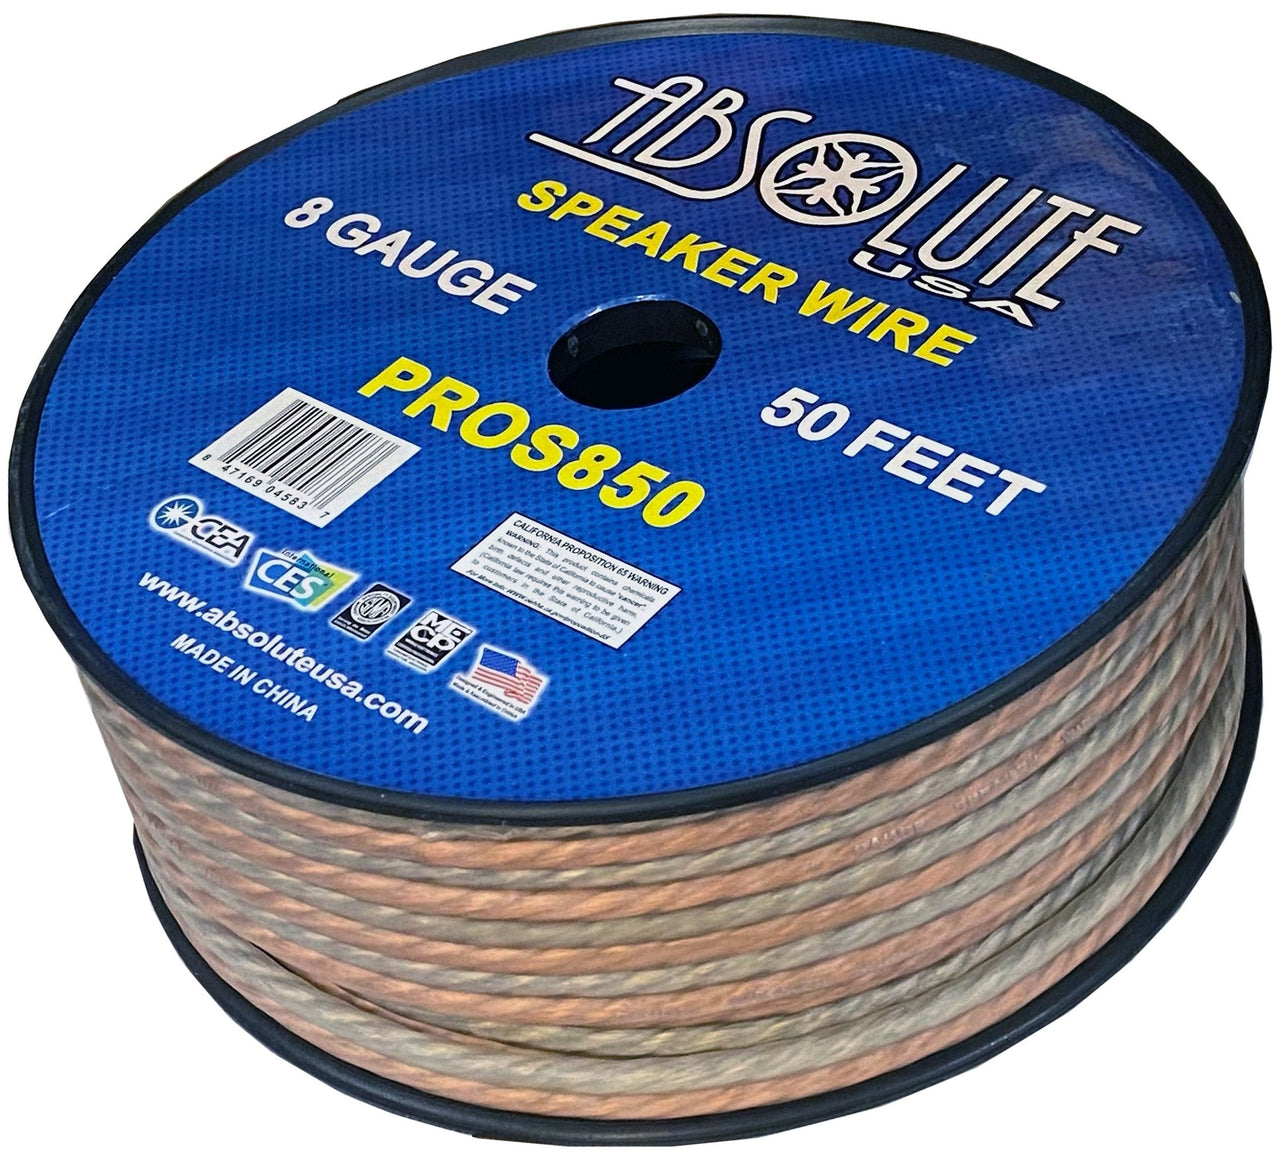 Absolute USA PROS850 8 Gauge Speaker Wire<br/>50' 8 Gauge PRO PA DJ Car Home Marine Audio Speaker Wire Cable Spool